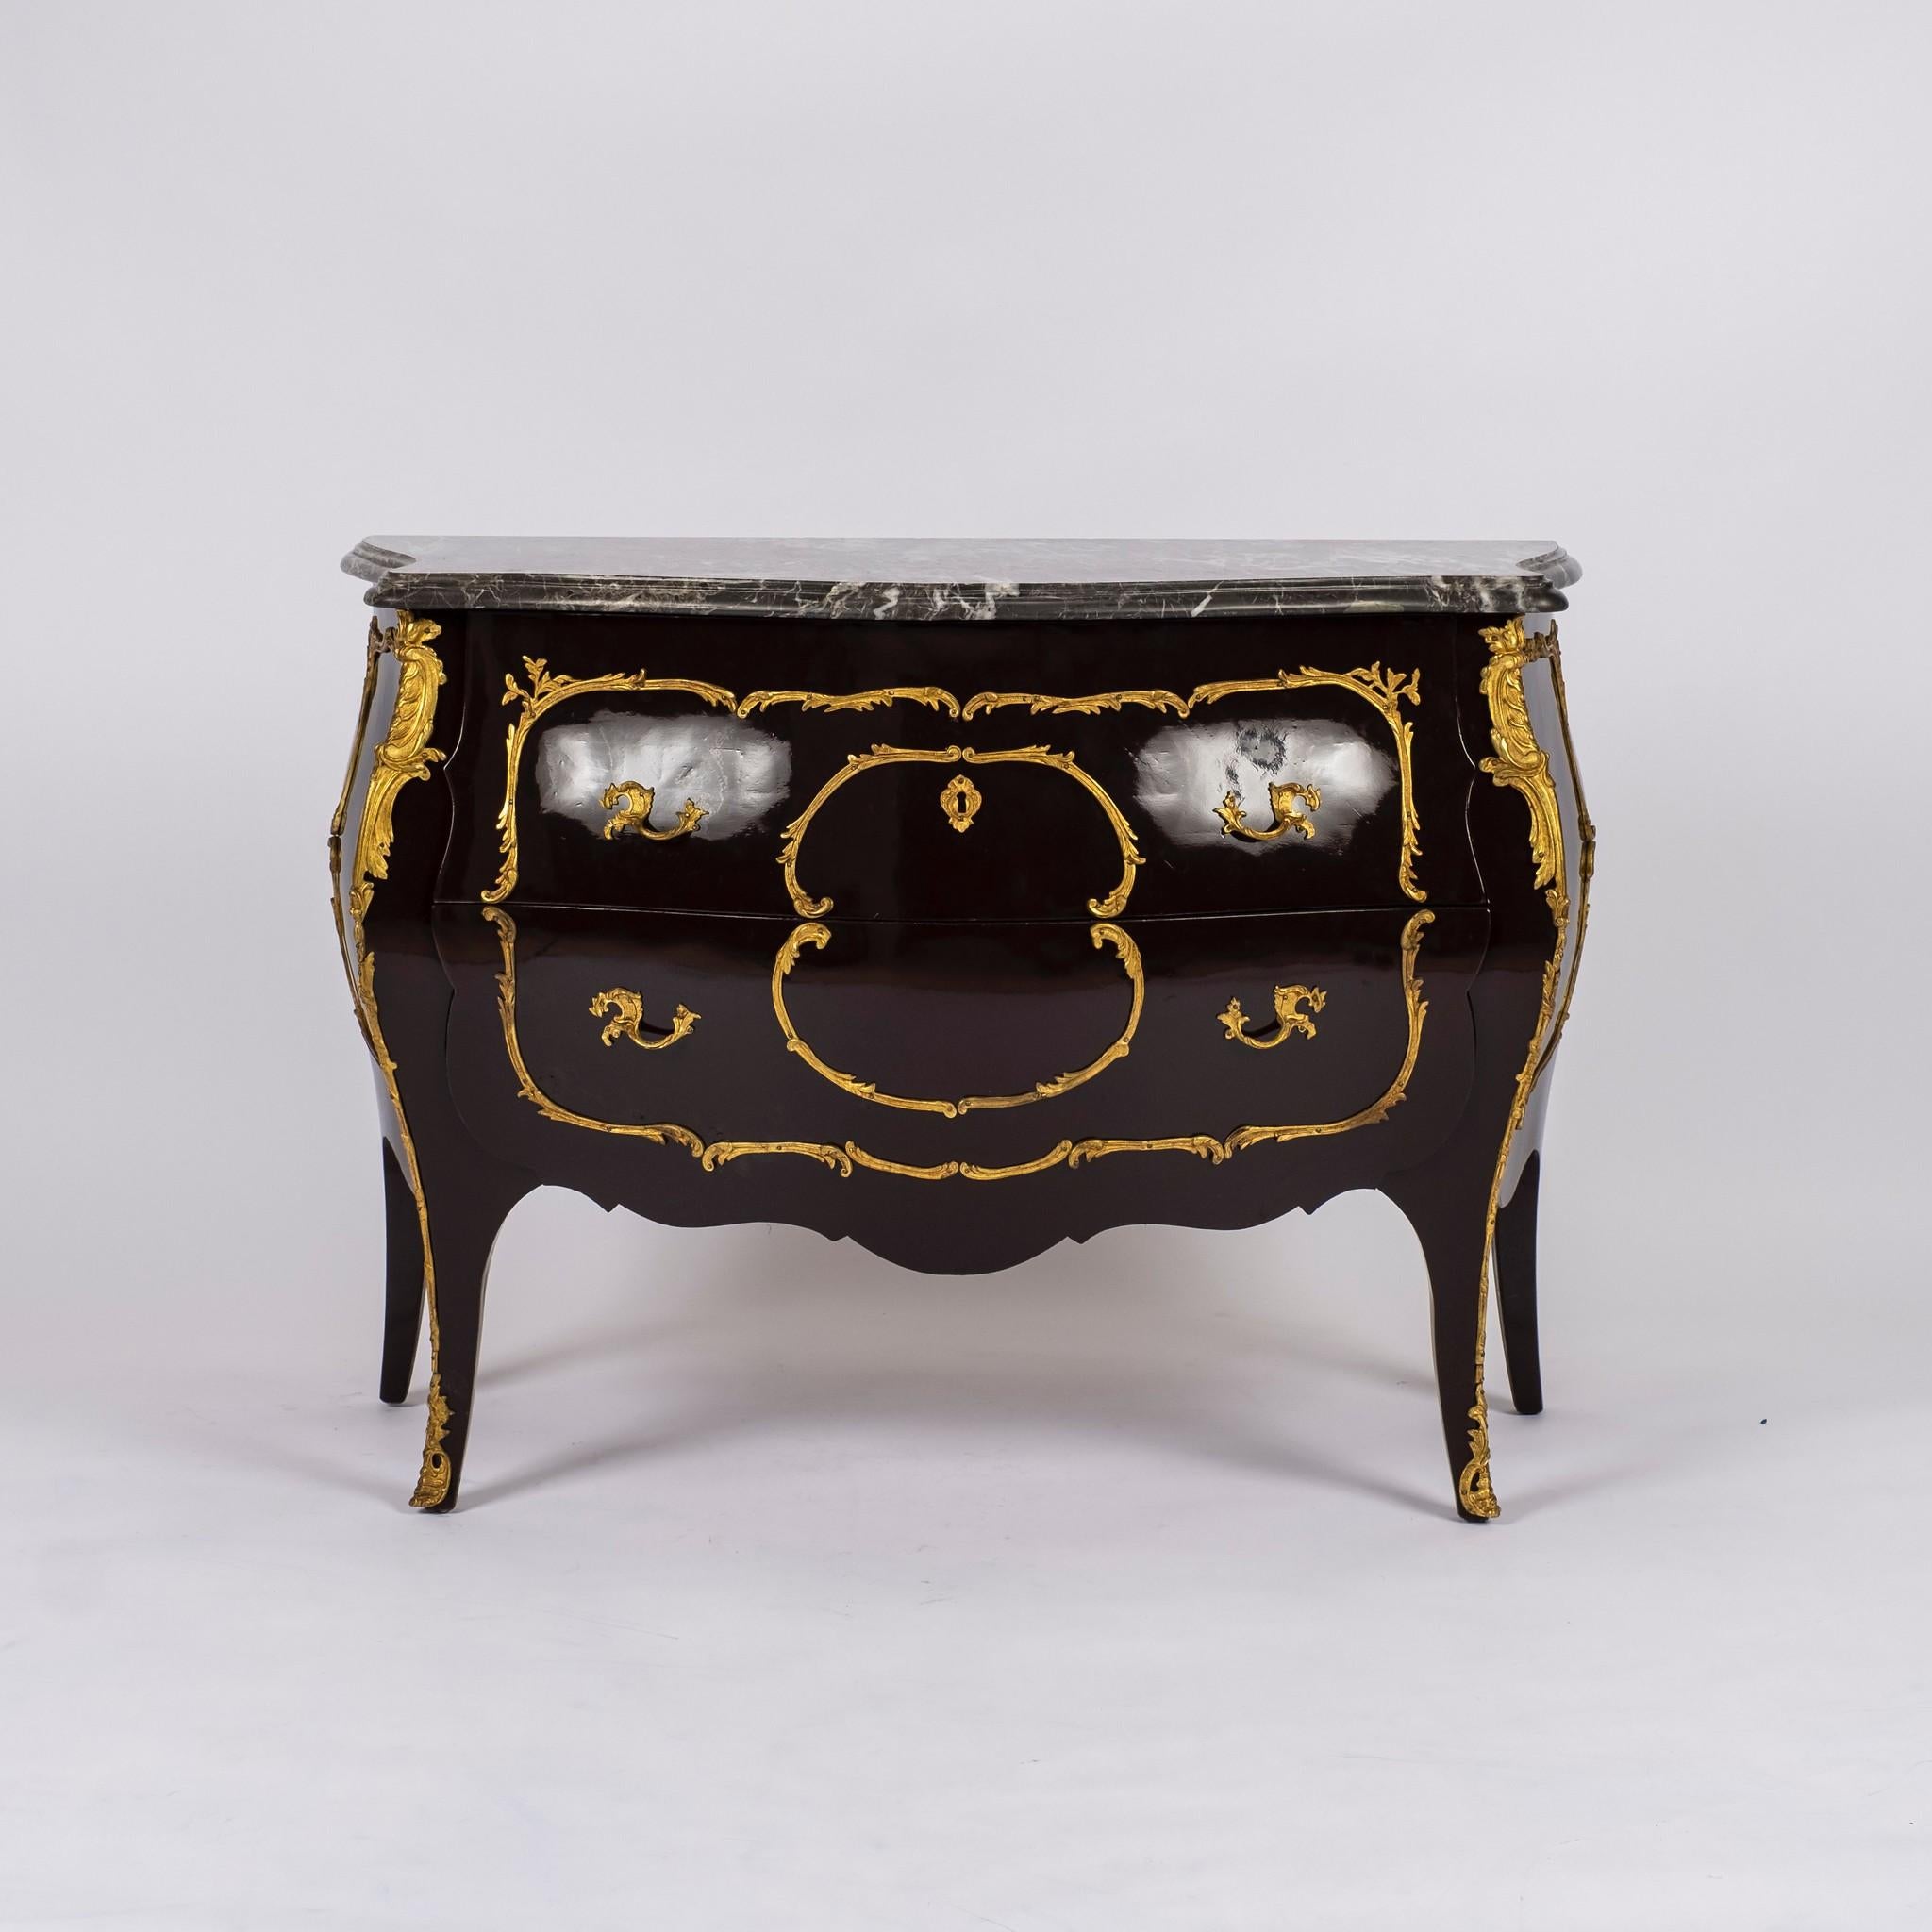 A vintage French Louis XV style commode newly painted in a super high gloss dark chocolate finish. This 